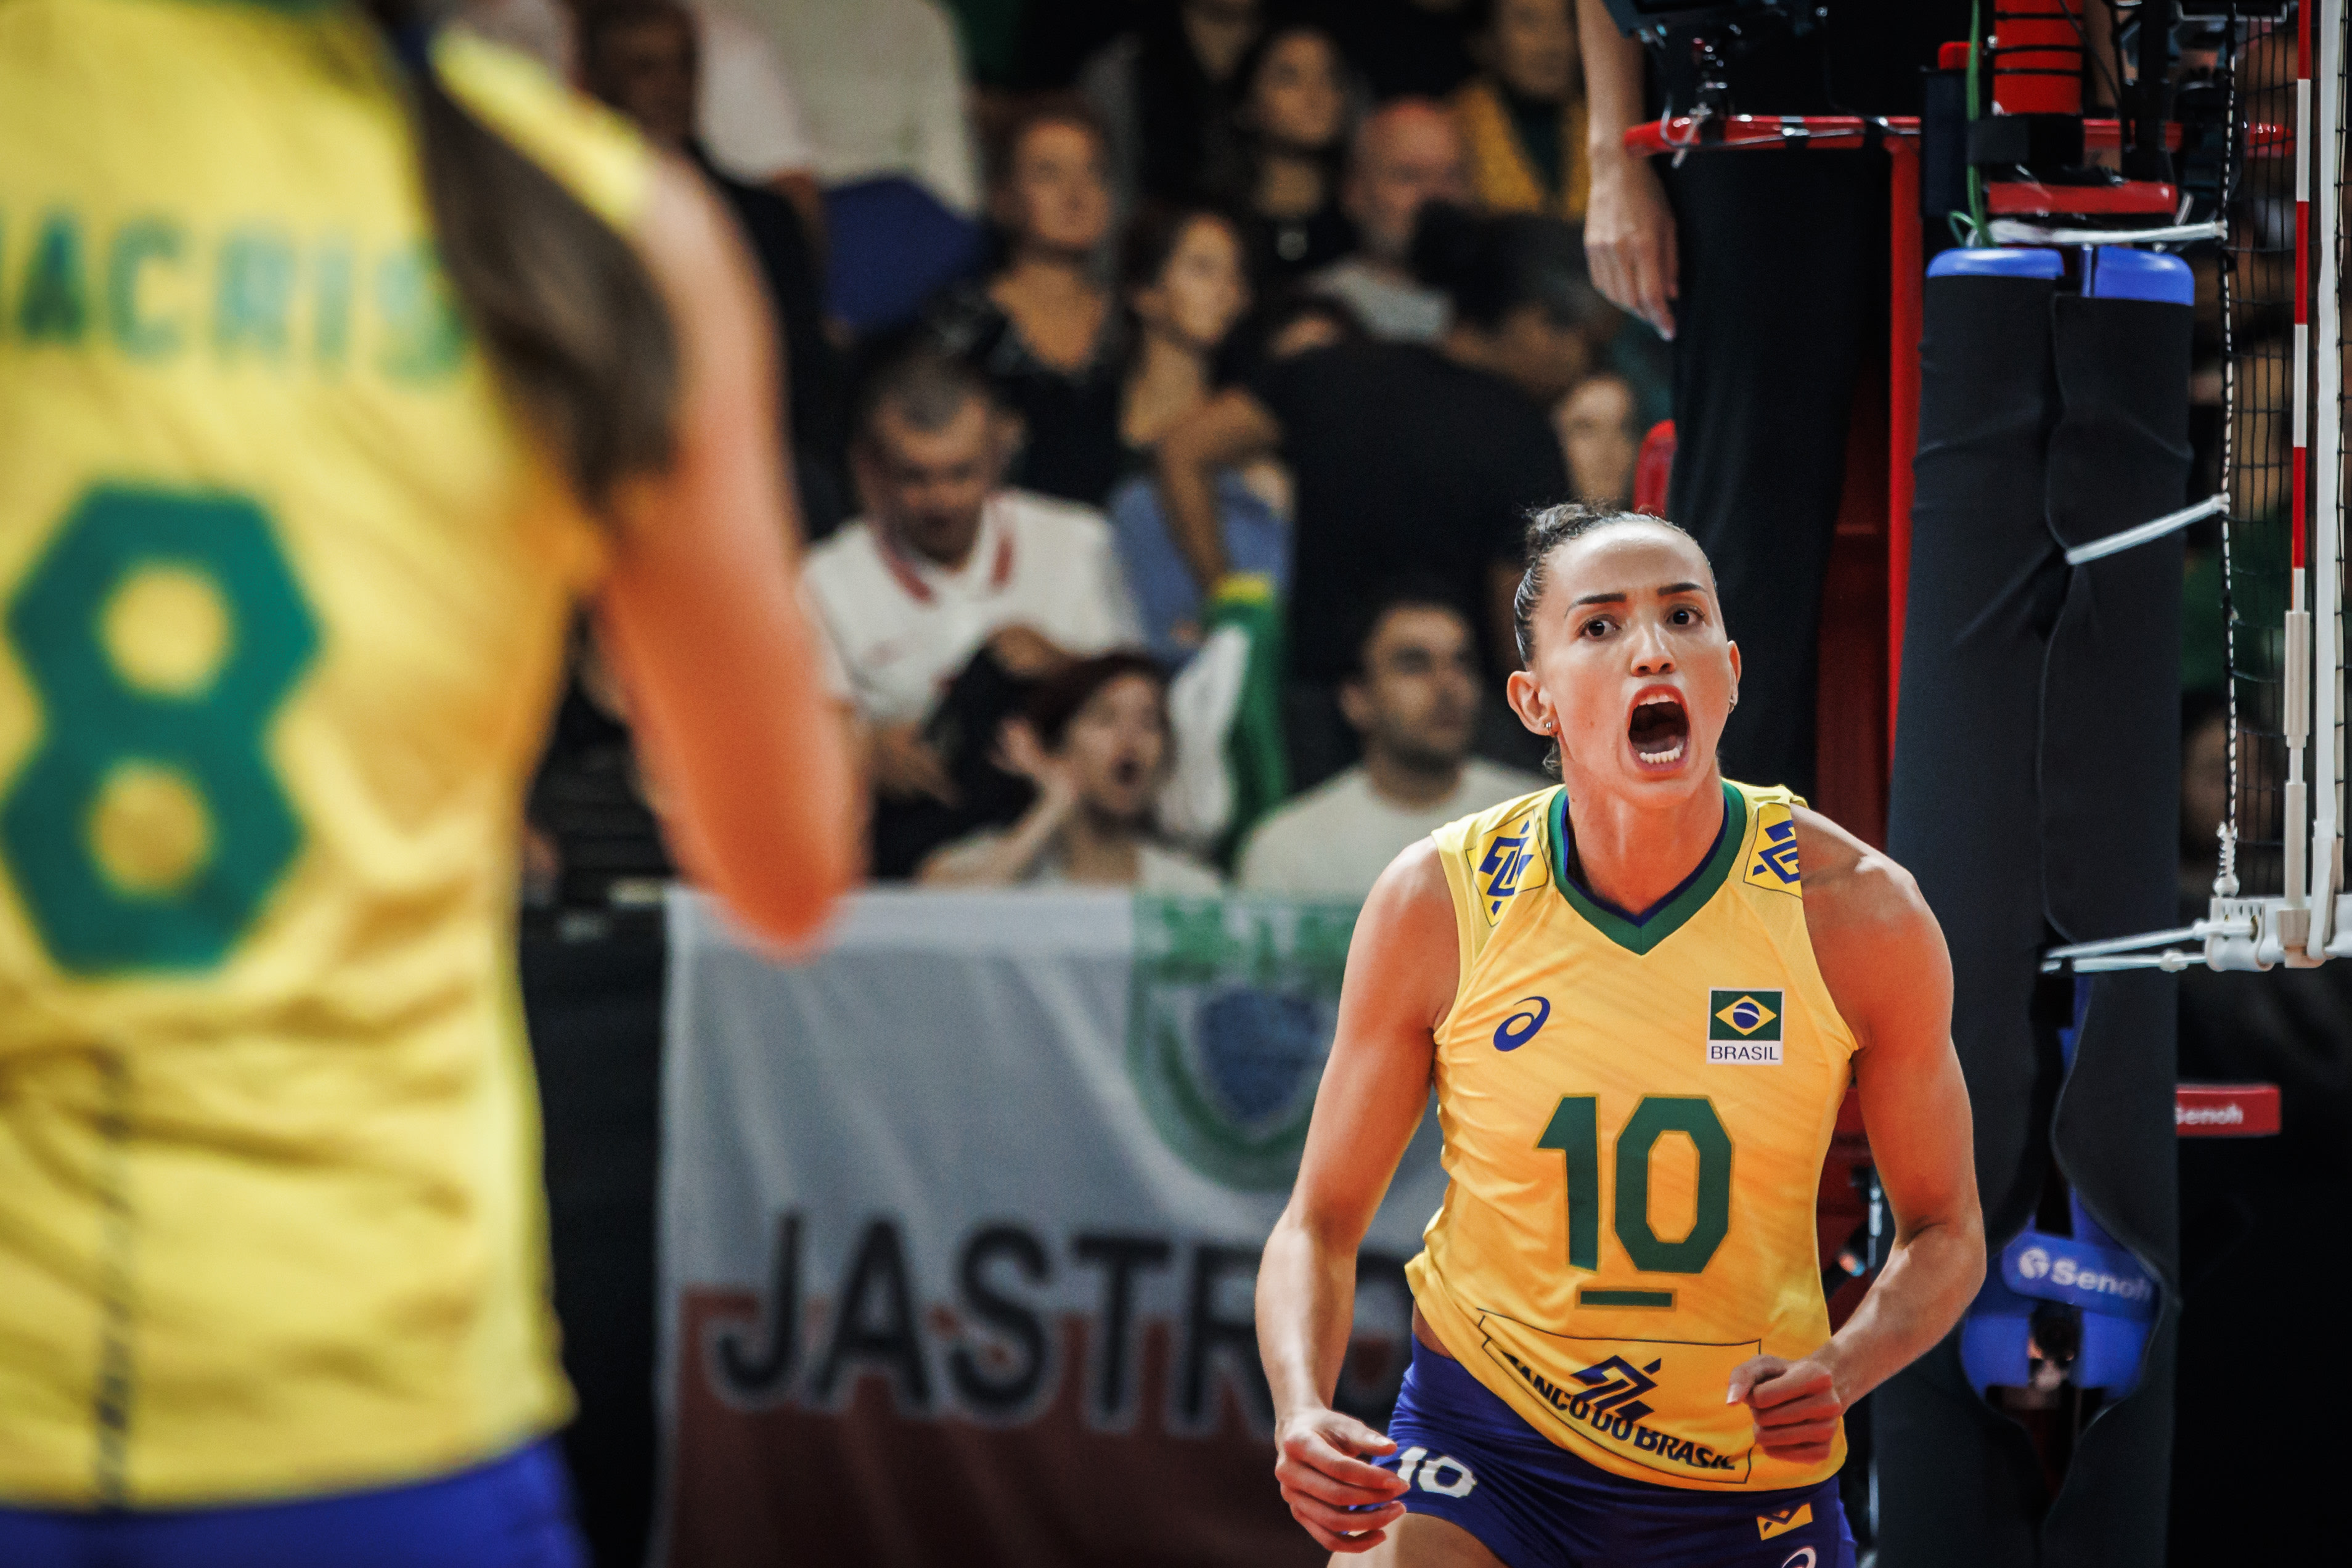 Brazil back in World Champs final after 12 years volleyballworld